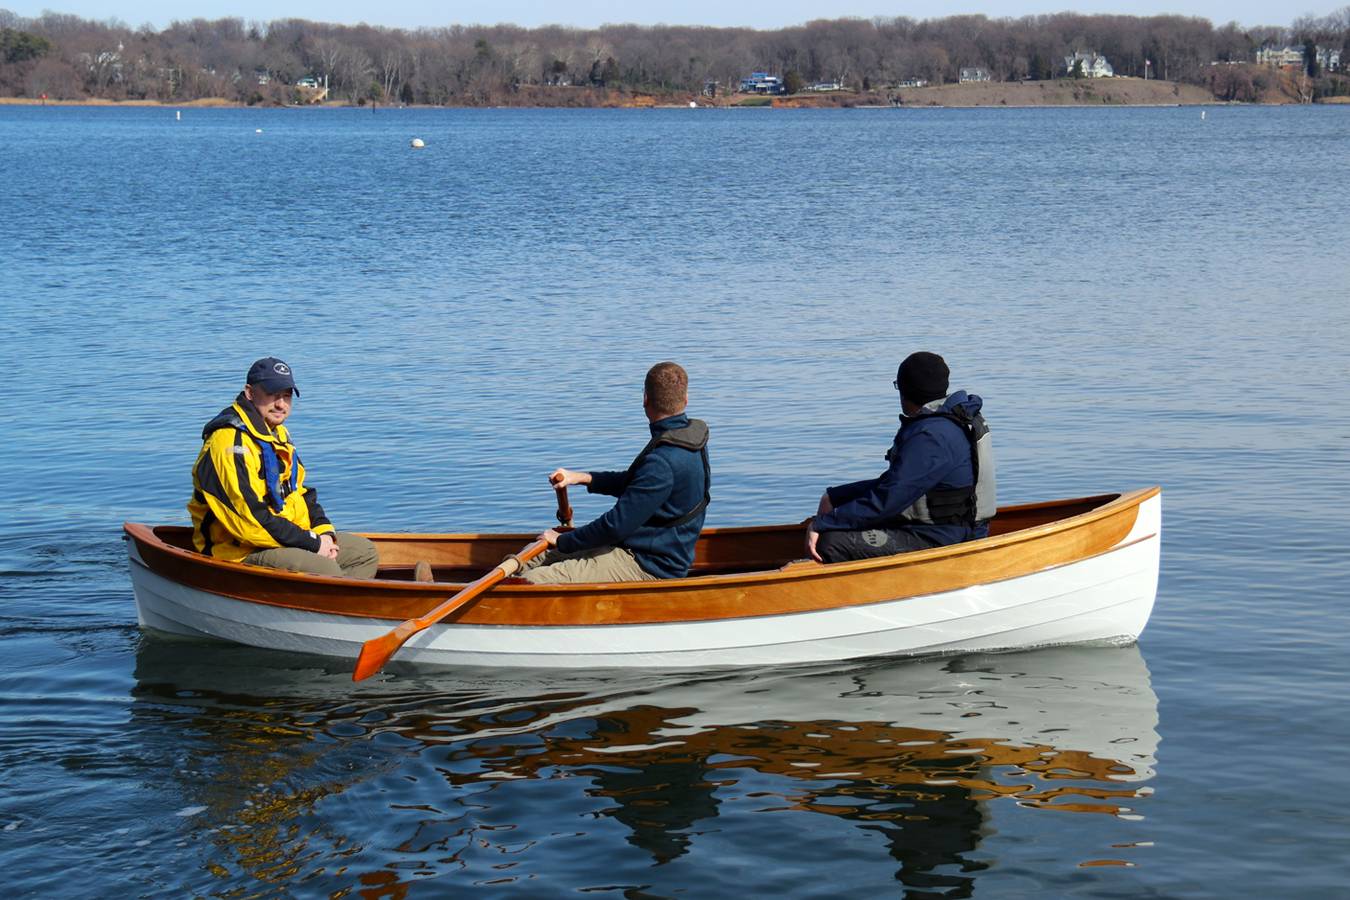 A modern wooden rowing boat based on a traditional Maine Peapod